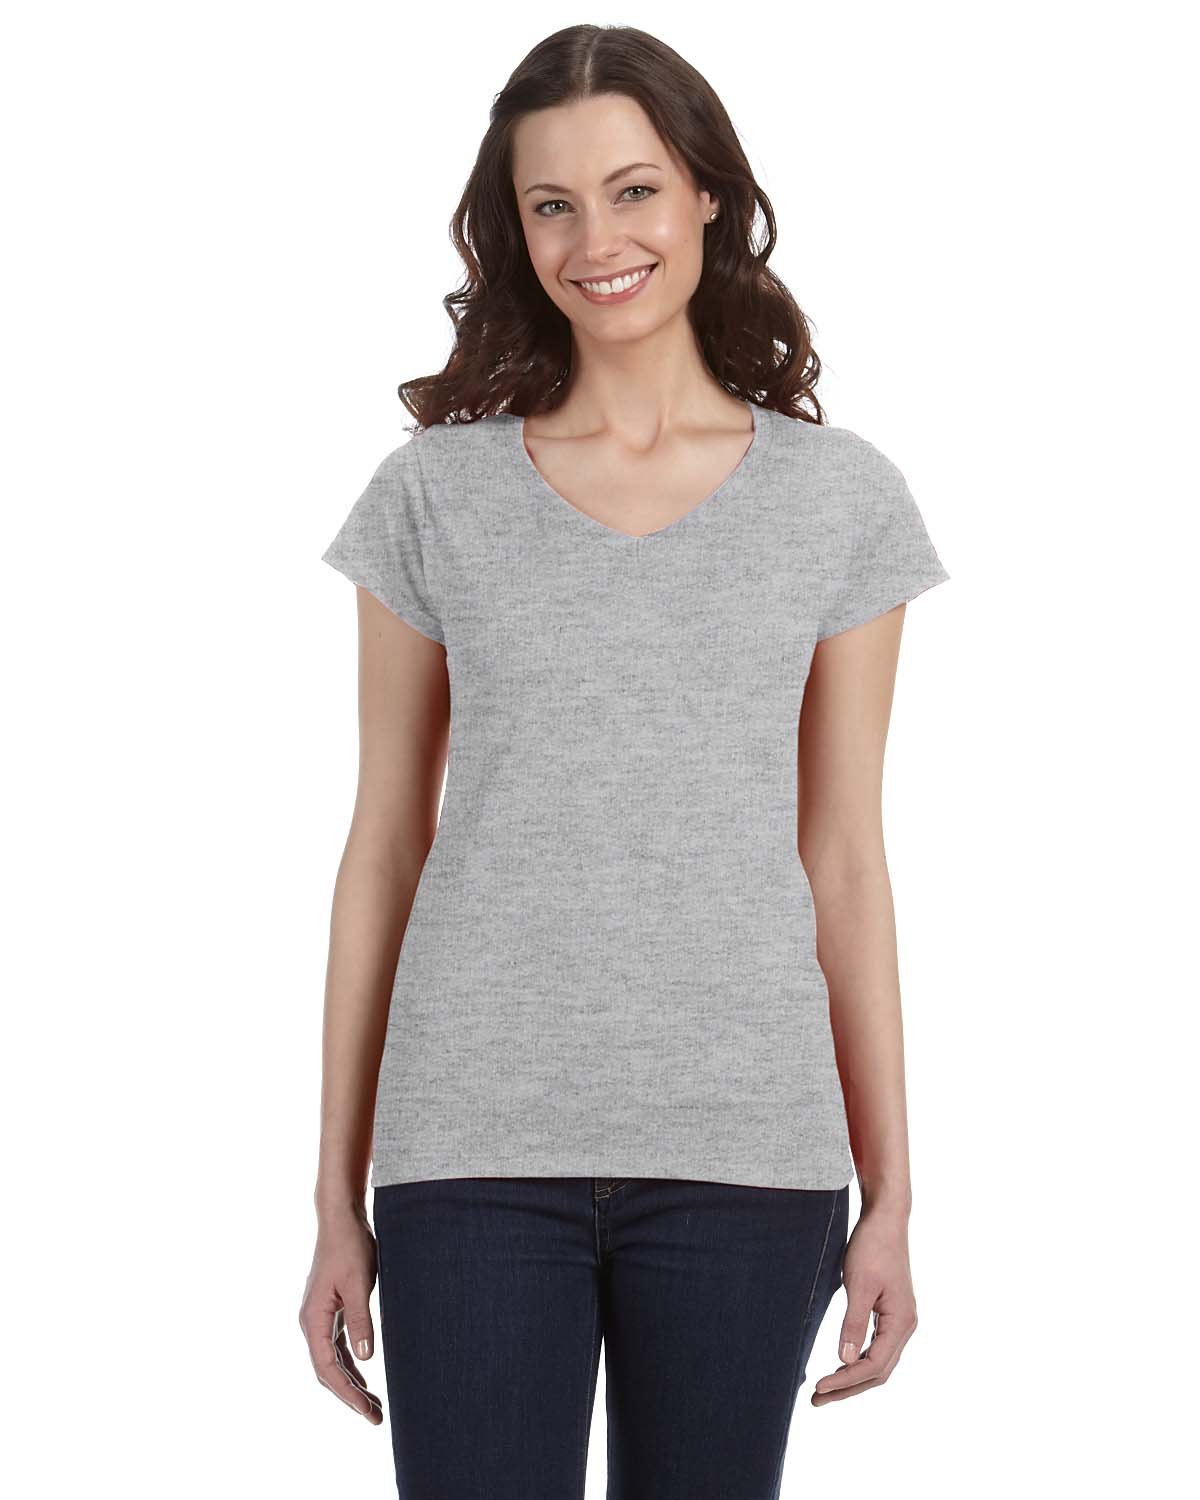 Gildan Ladies' SoftStyle®  Fitted V-Neck T-Shirt RS SPORT GREY 